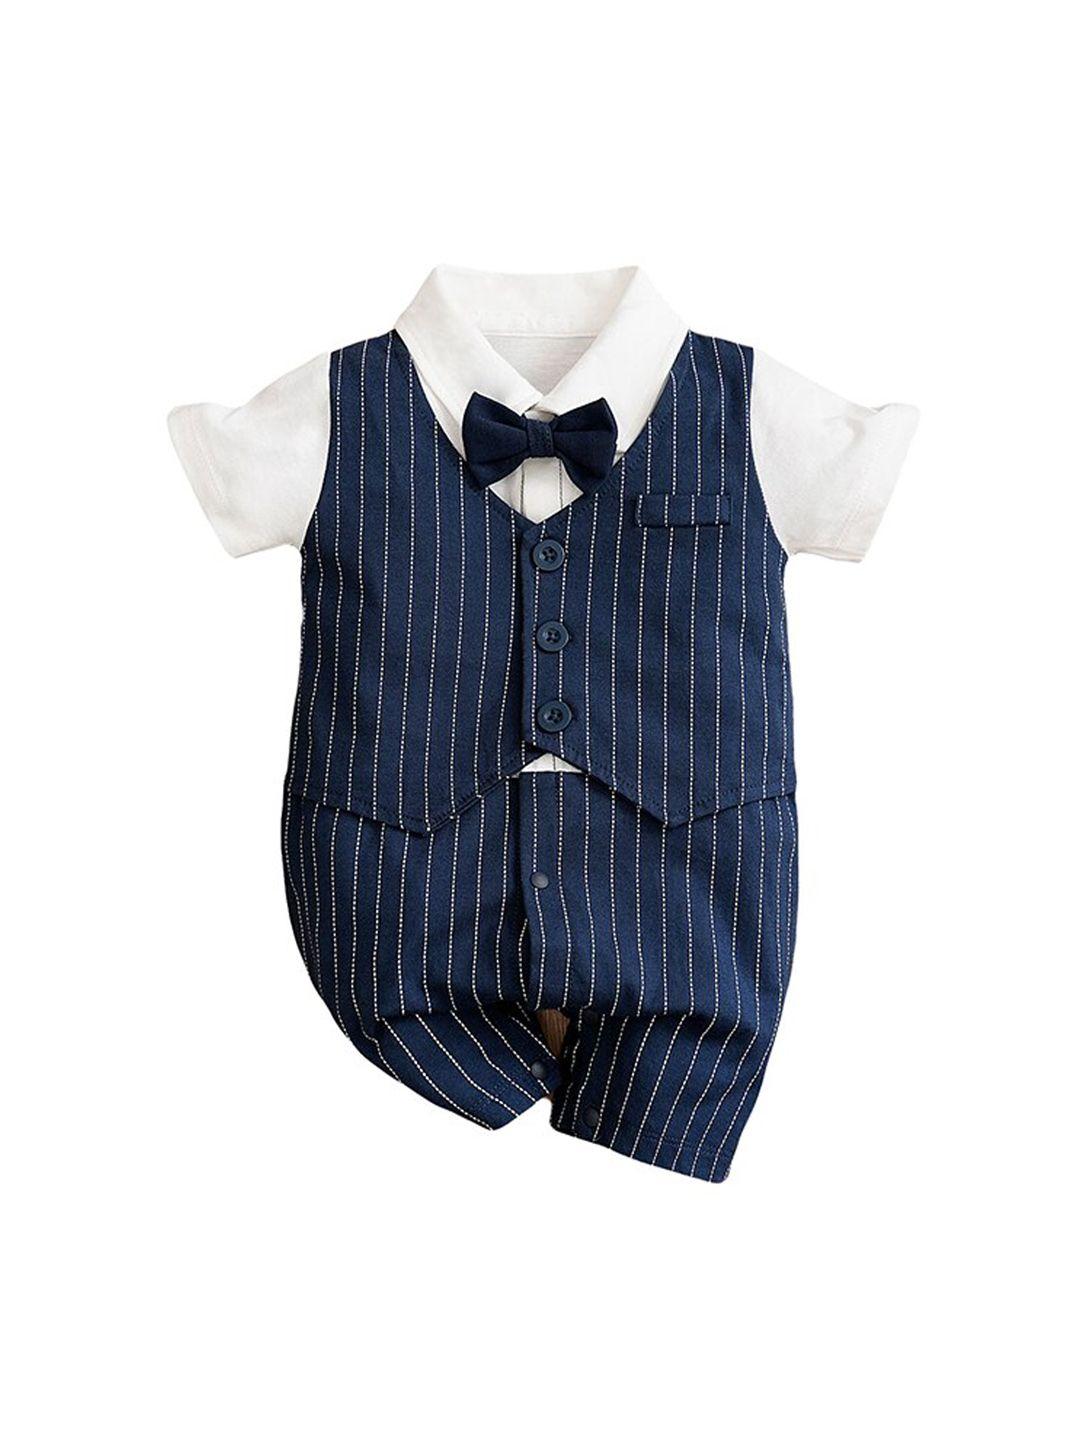 stylecast infant boys navy blue striped spread collar pure cotton rompers